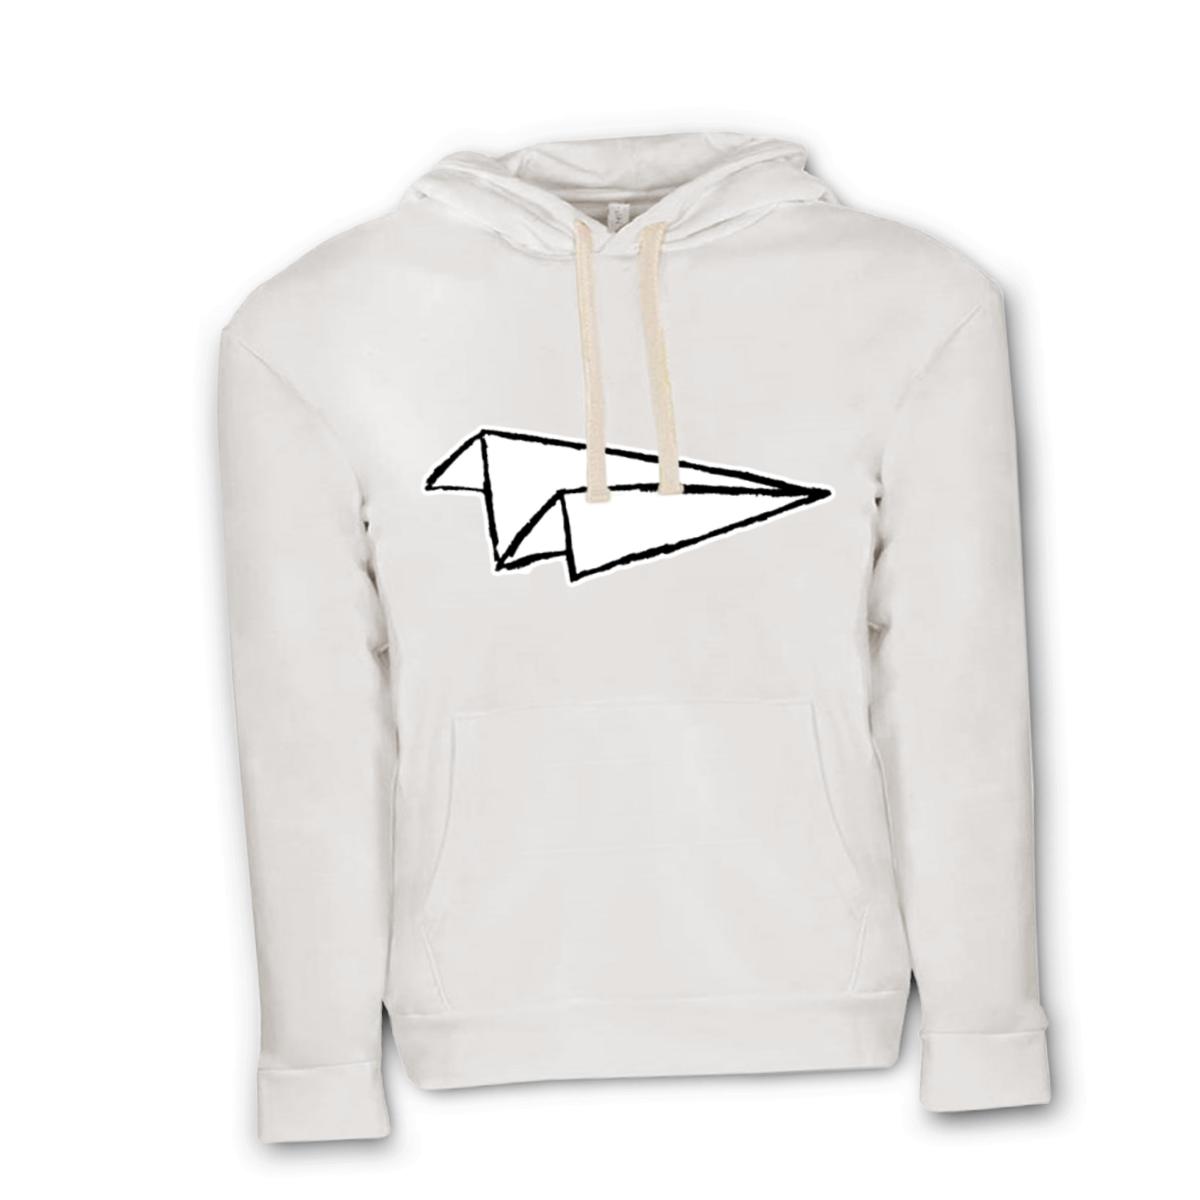 Airplane Sketch Unisex Pullover Hoodie Small white